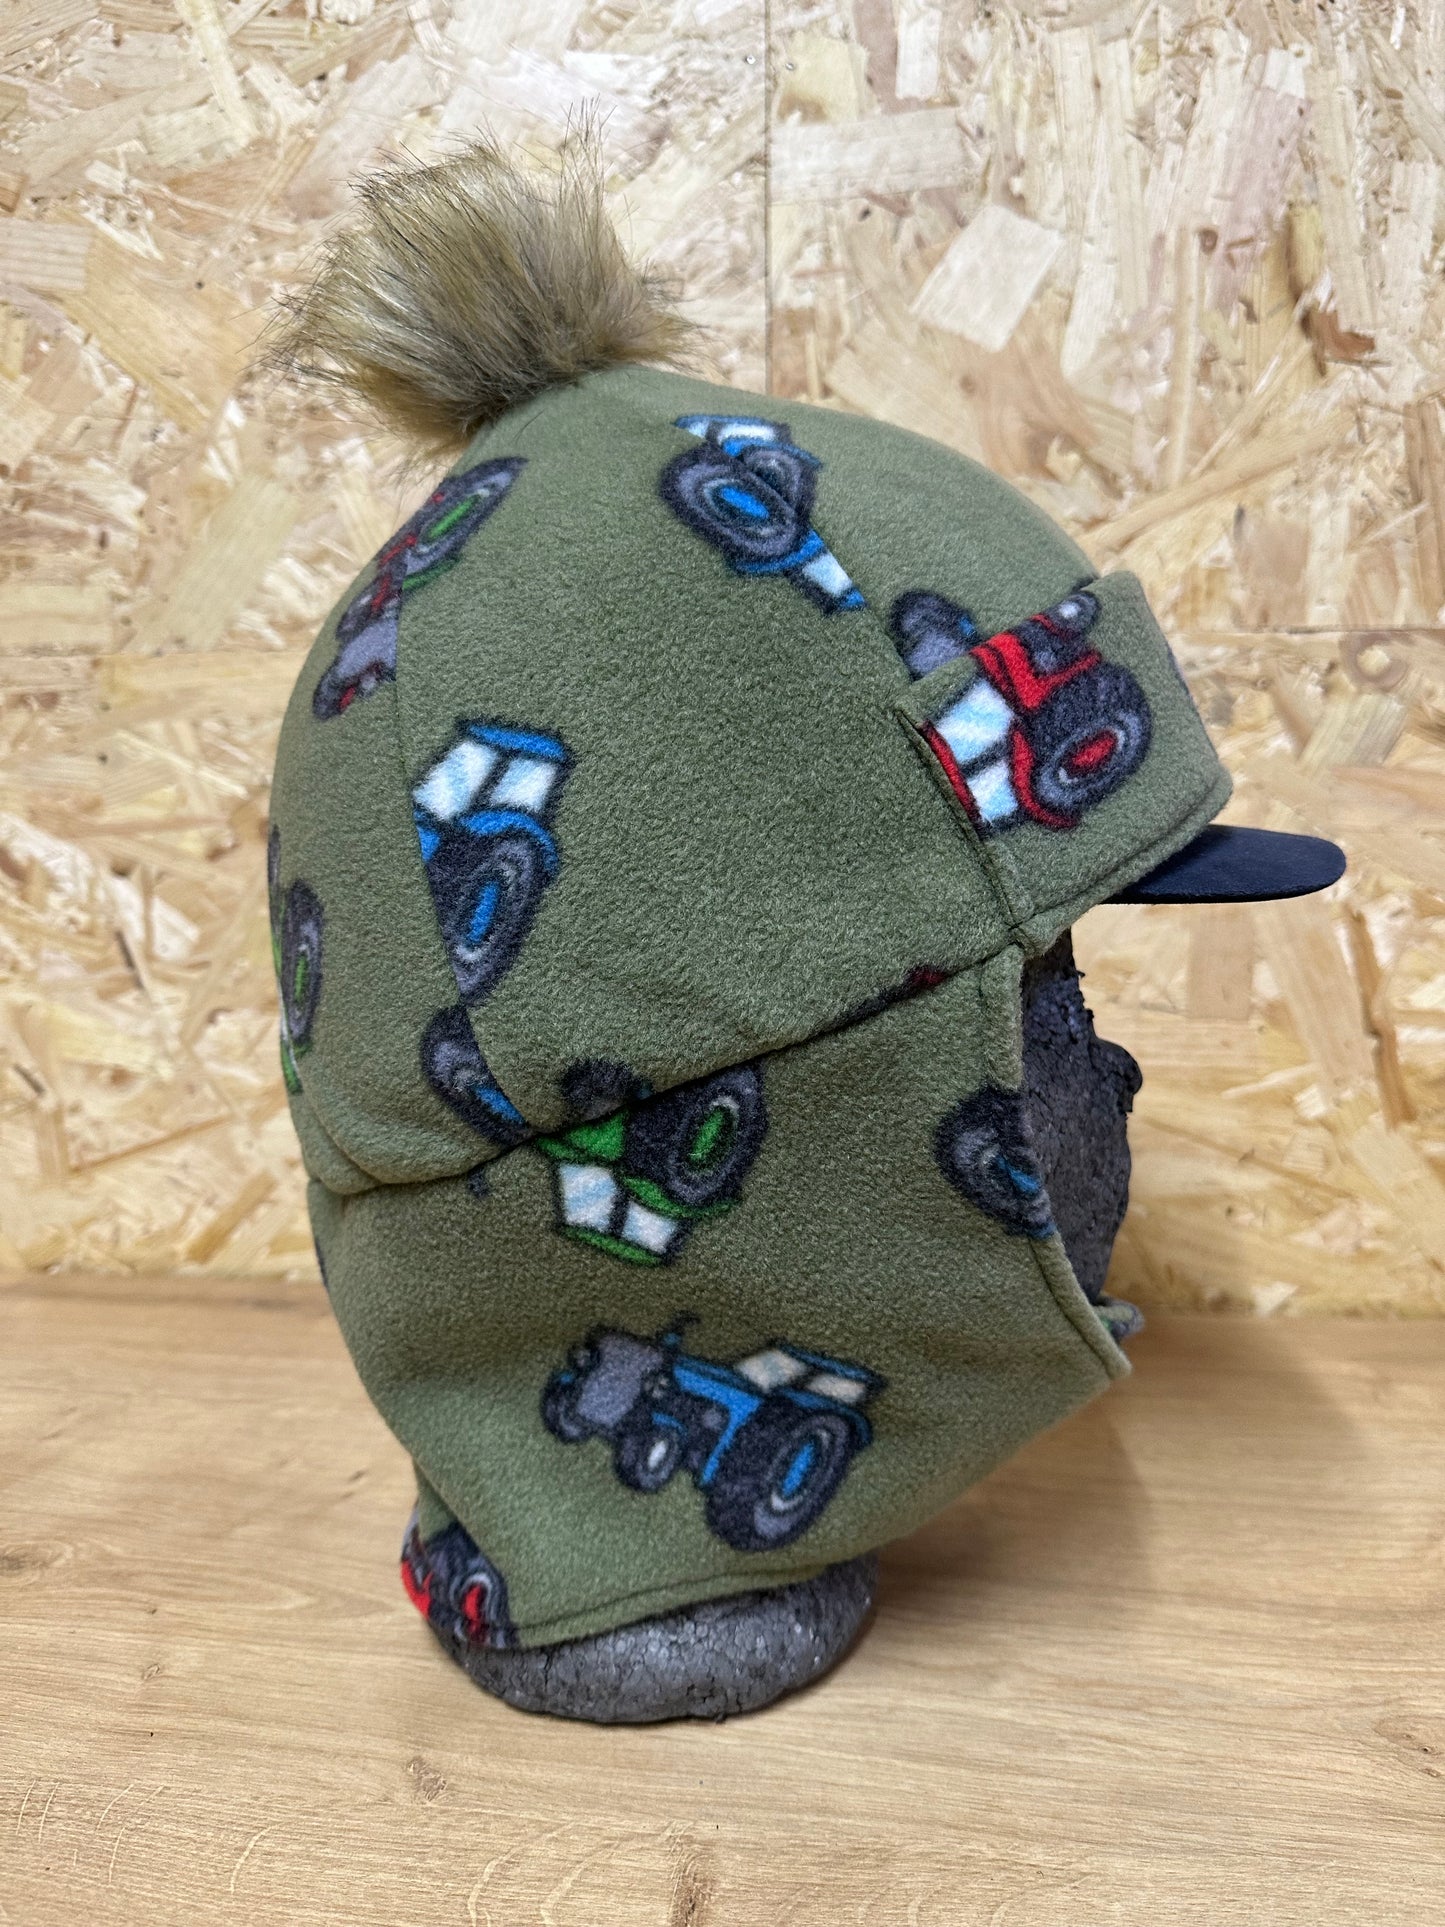 Adult Size Riding Hat / Face Cover